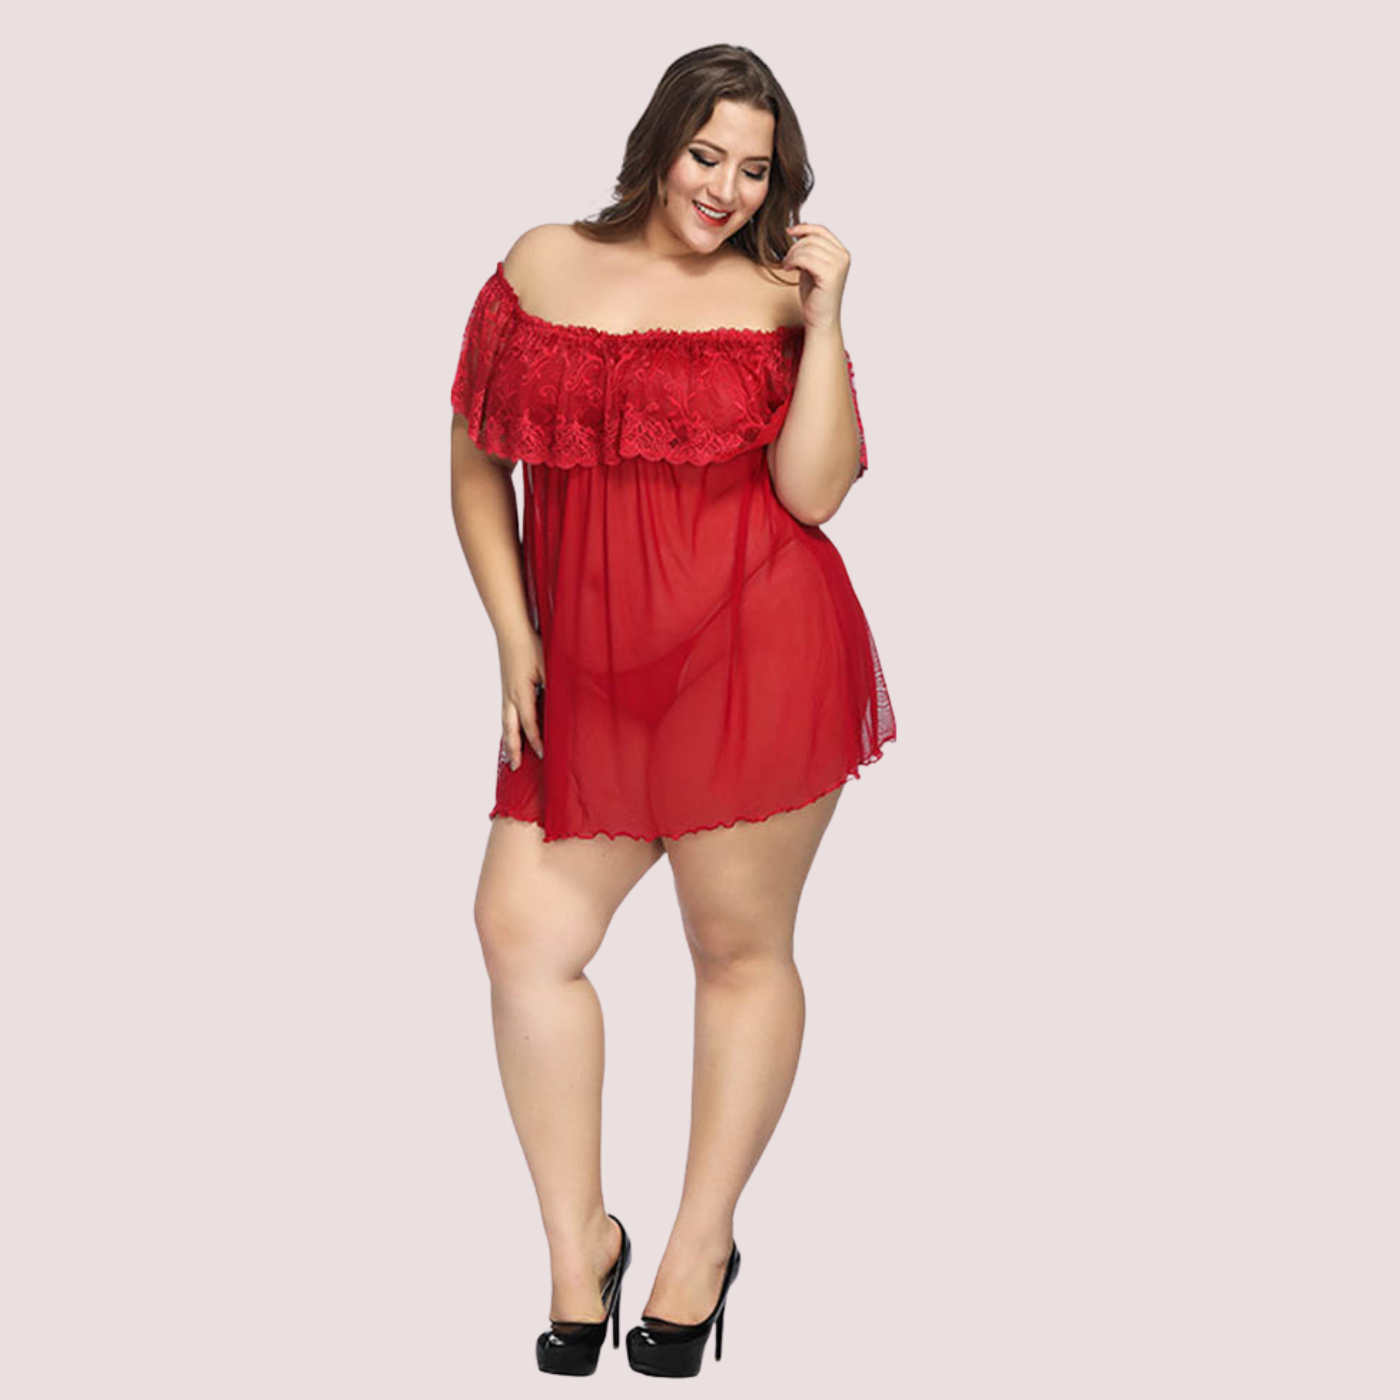 Plus Size Lingerie For Dropshipping- Snazzyway